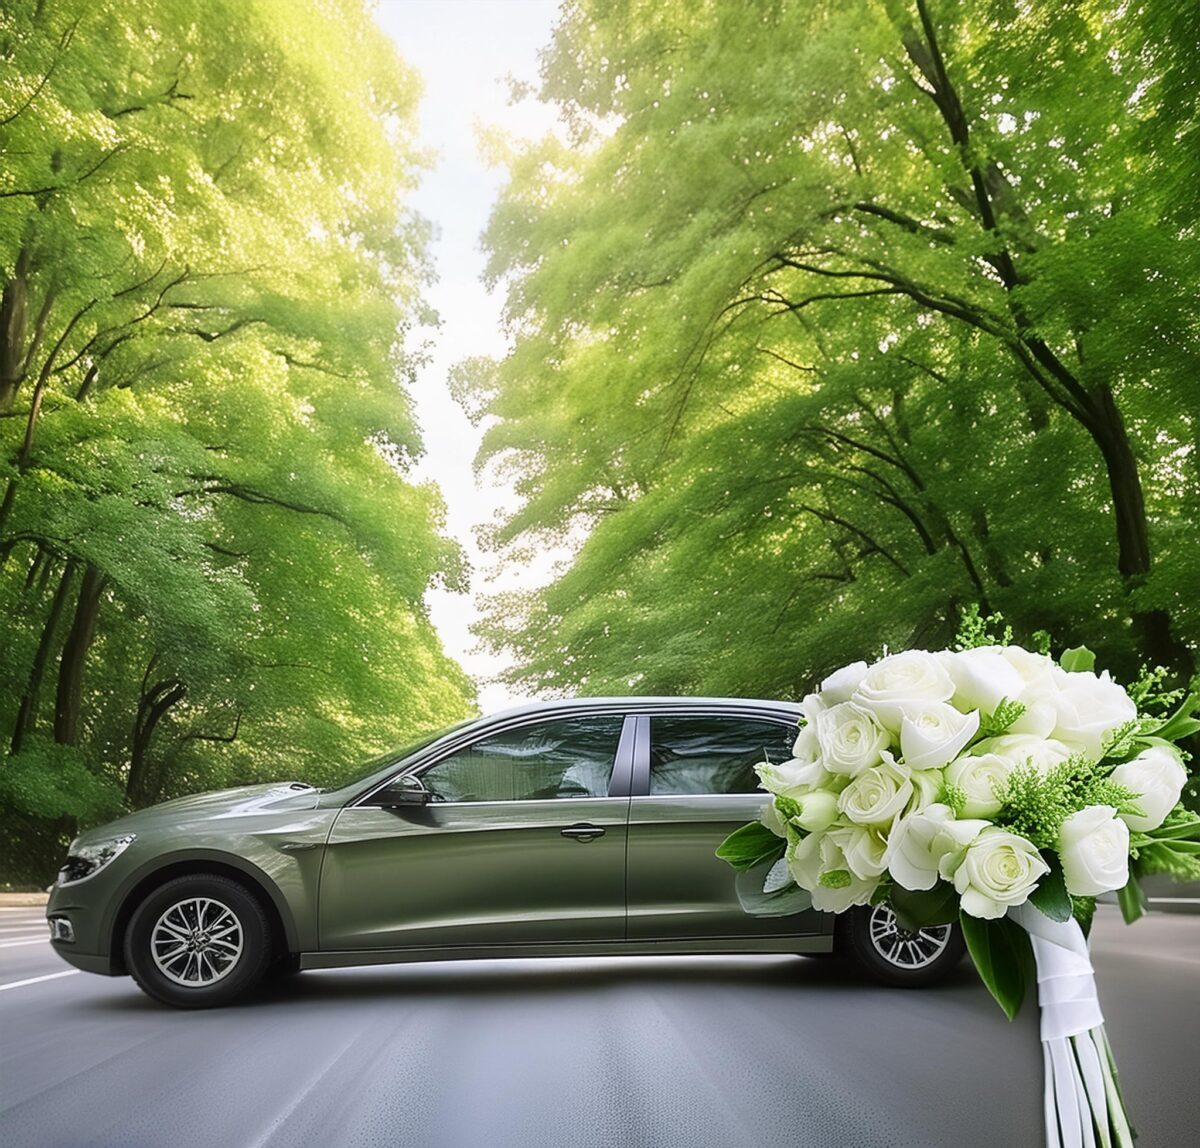 home care tips wedding transport: how top limo services bring safety